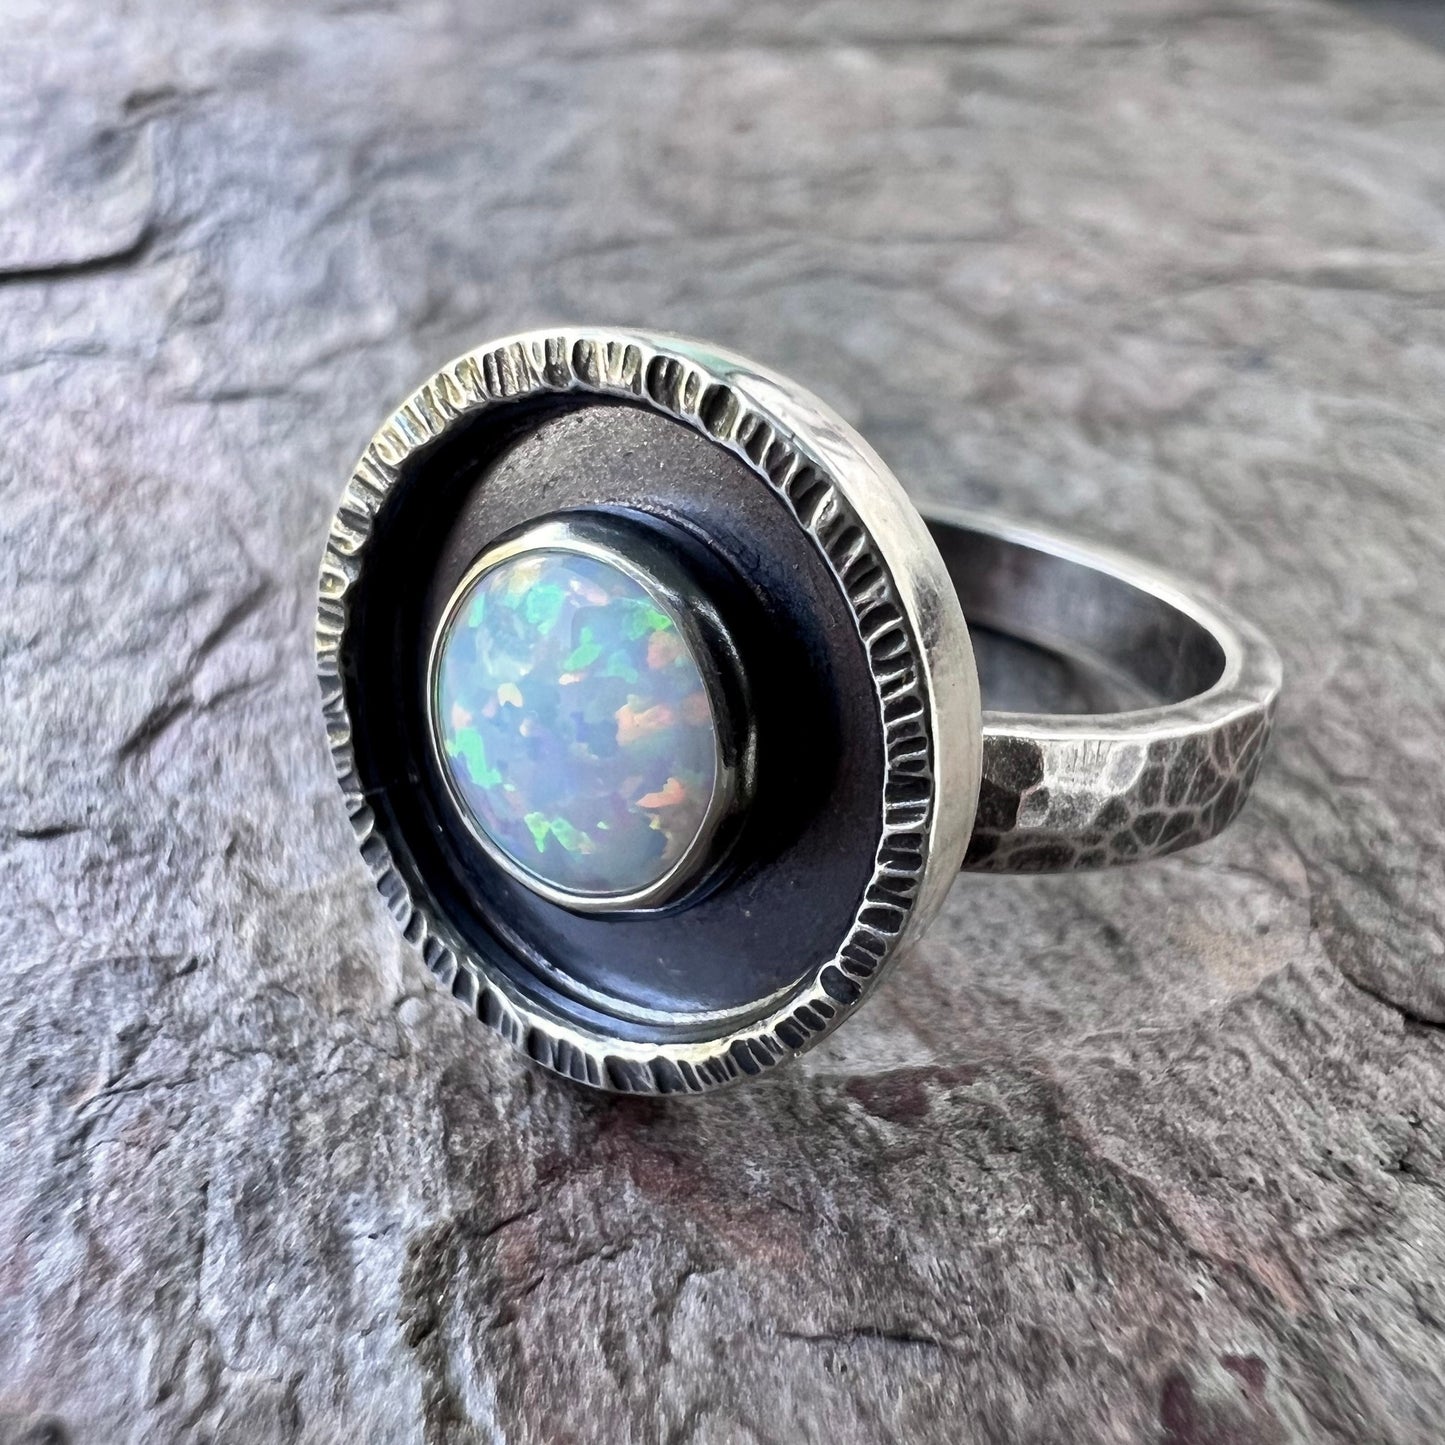 Opal Sterling Silver Ring - Handmade Simulated Opal Cabochon Sterling Silver Ring - Size 8